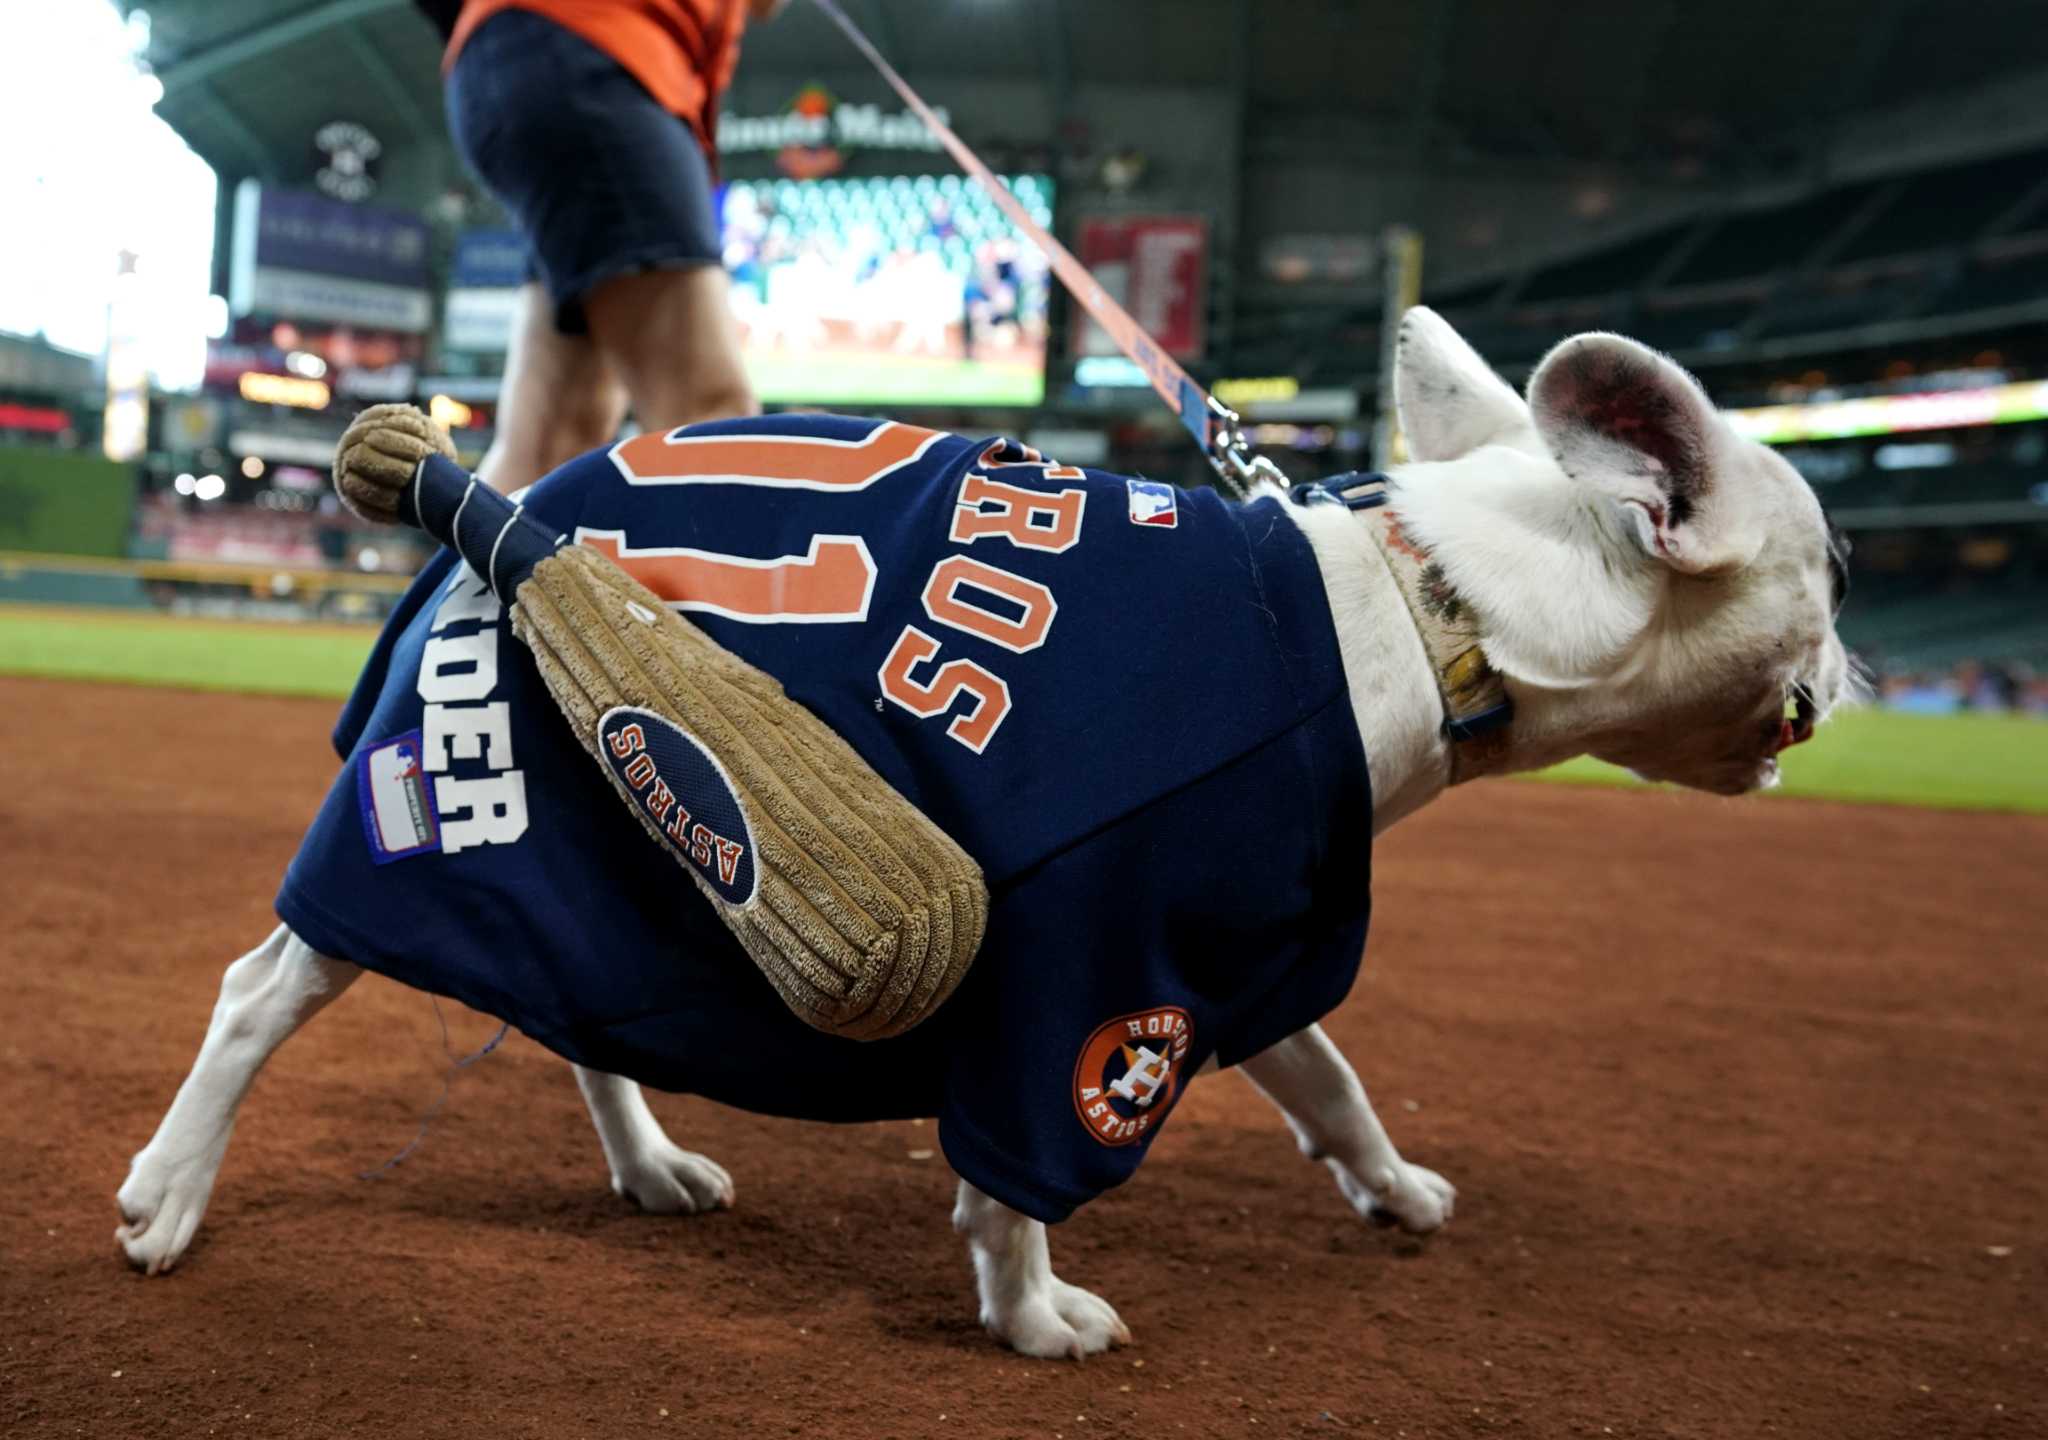 Houston Astros - It was dog day today at Fitteam Ballpark